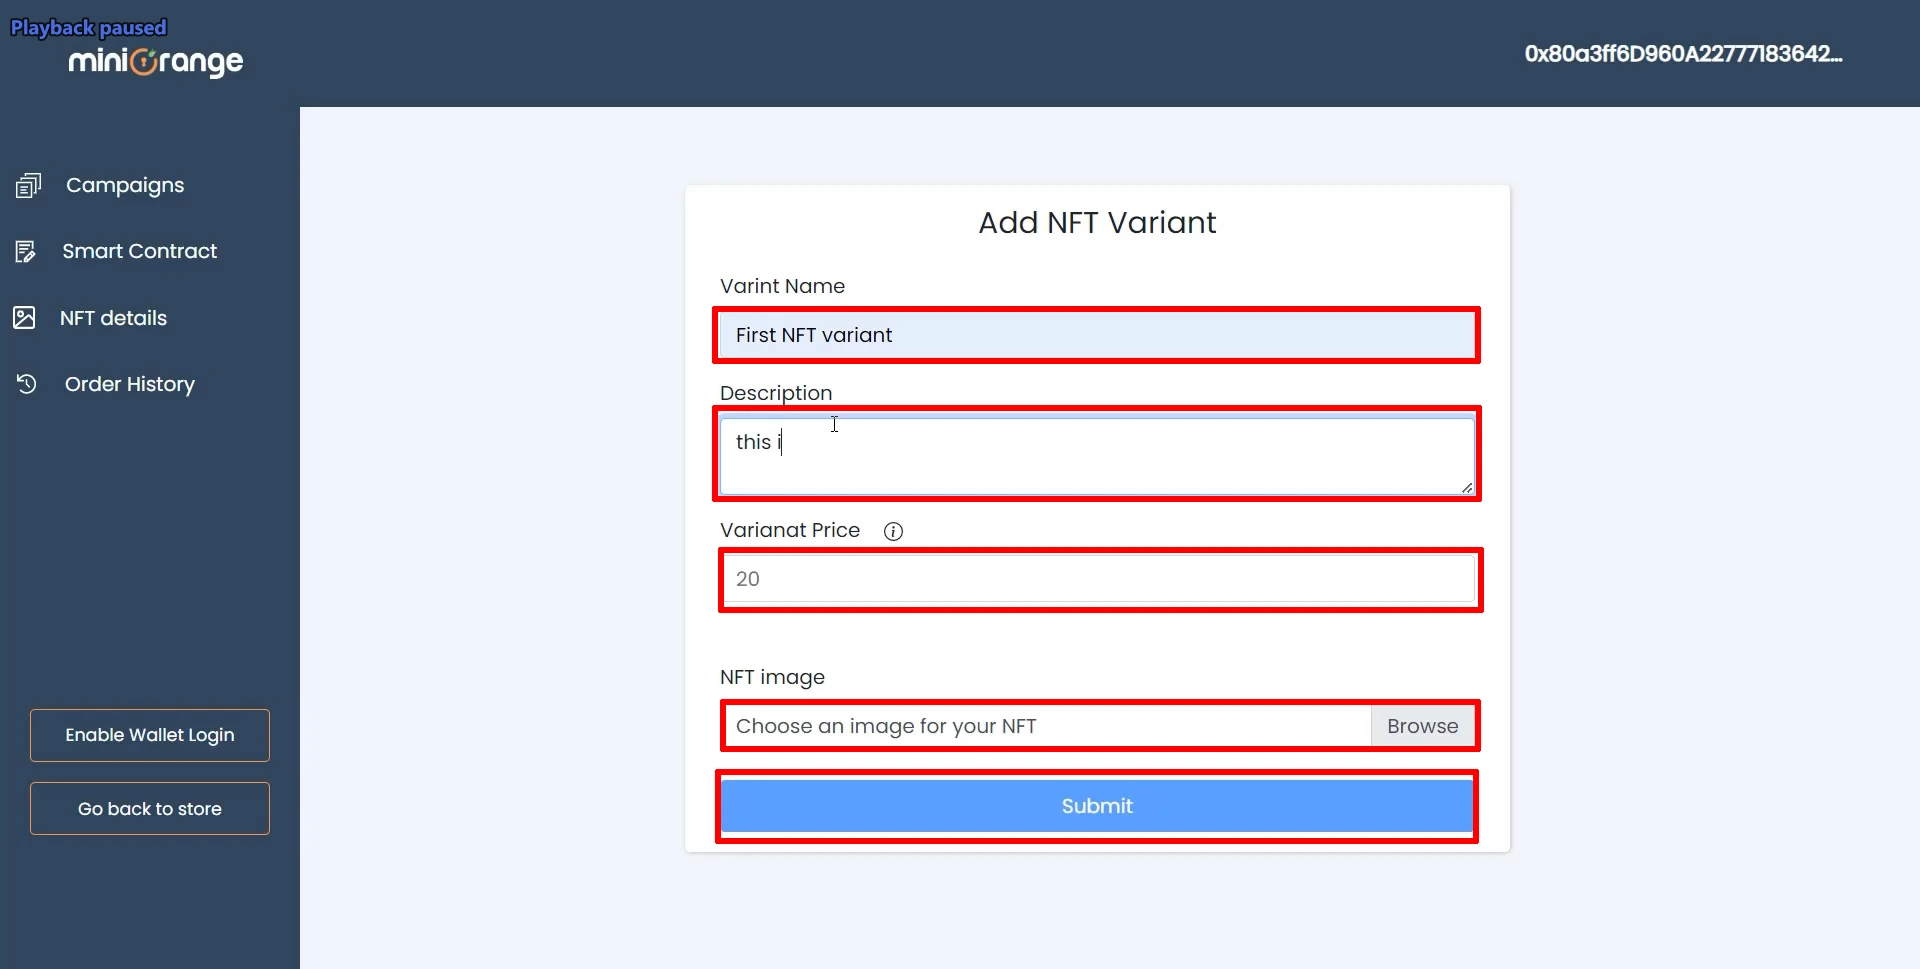 Sell NFT on Shopify - How to sell NFT on Shopify Store - NFT Variant description